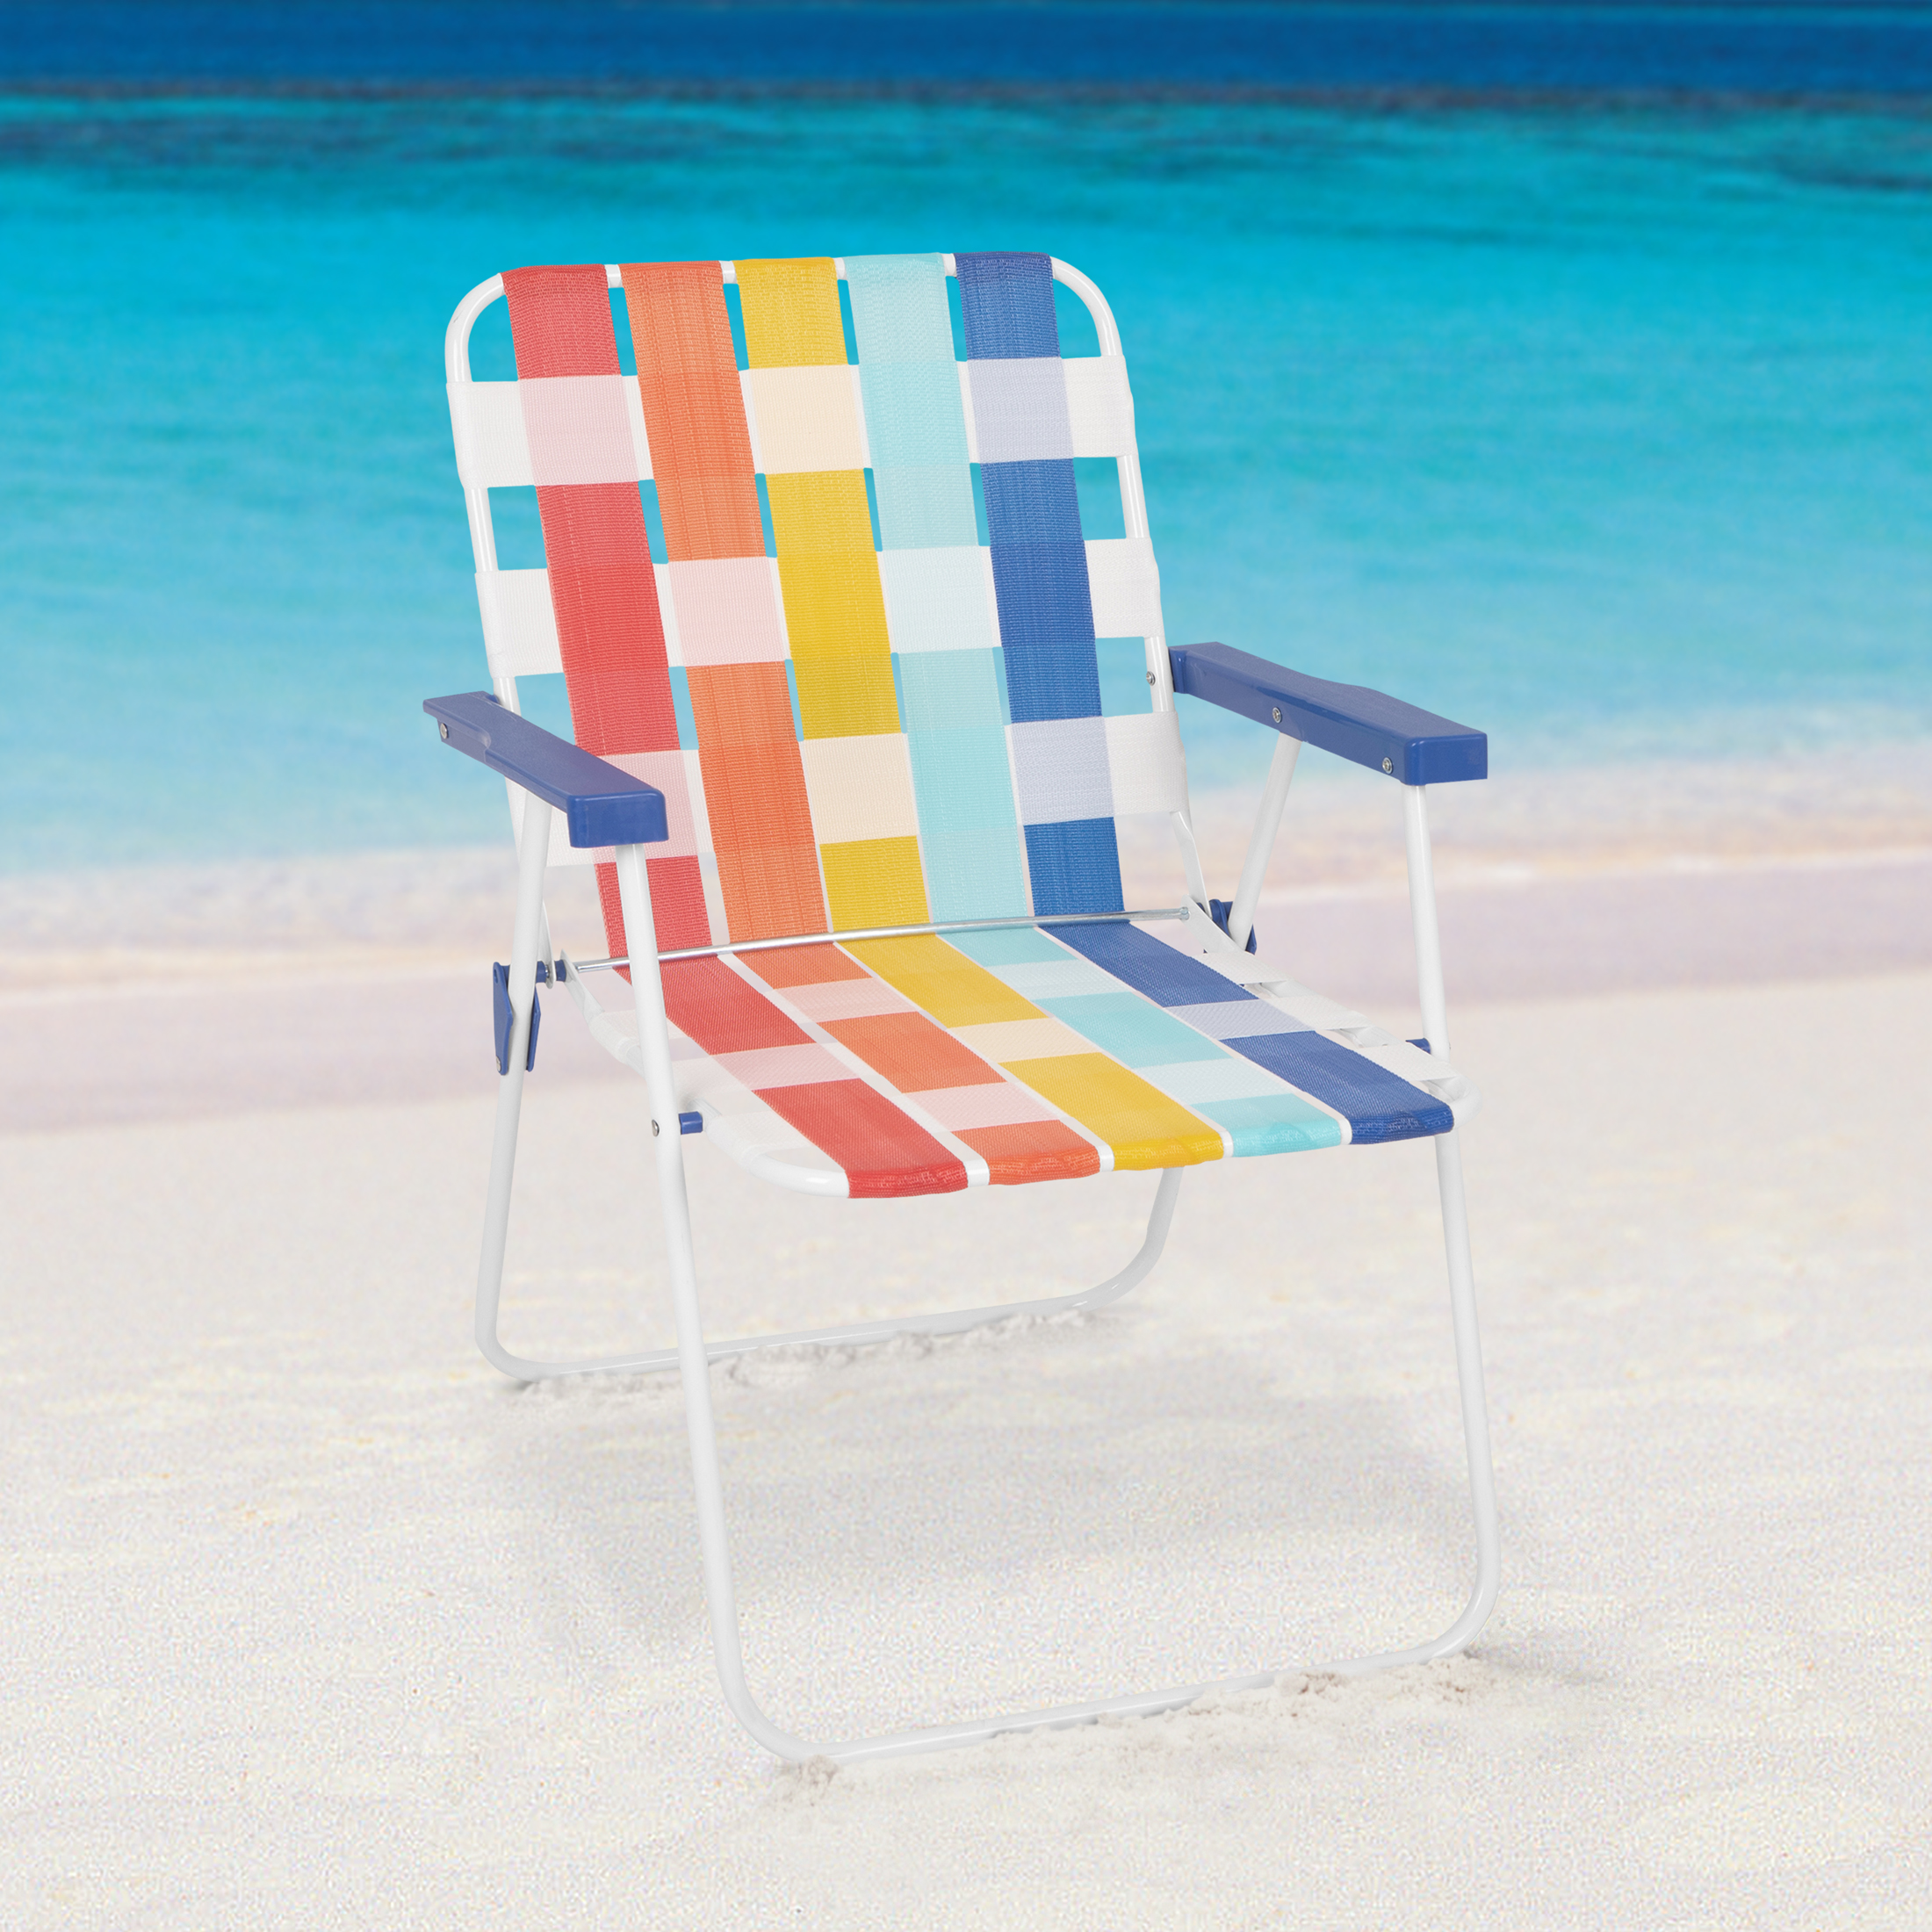 Mainstays Folding Beach Web Chair, Multicolor - image 1 of 9